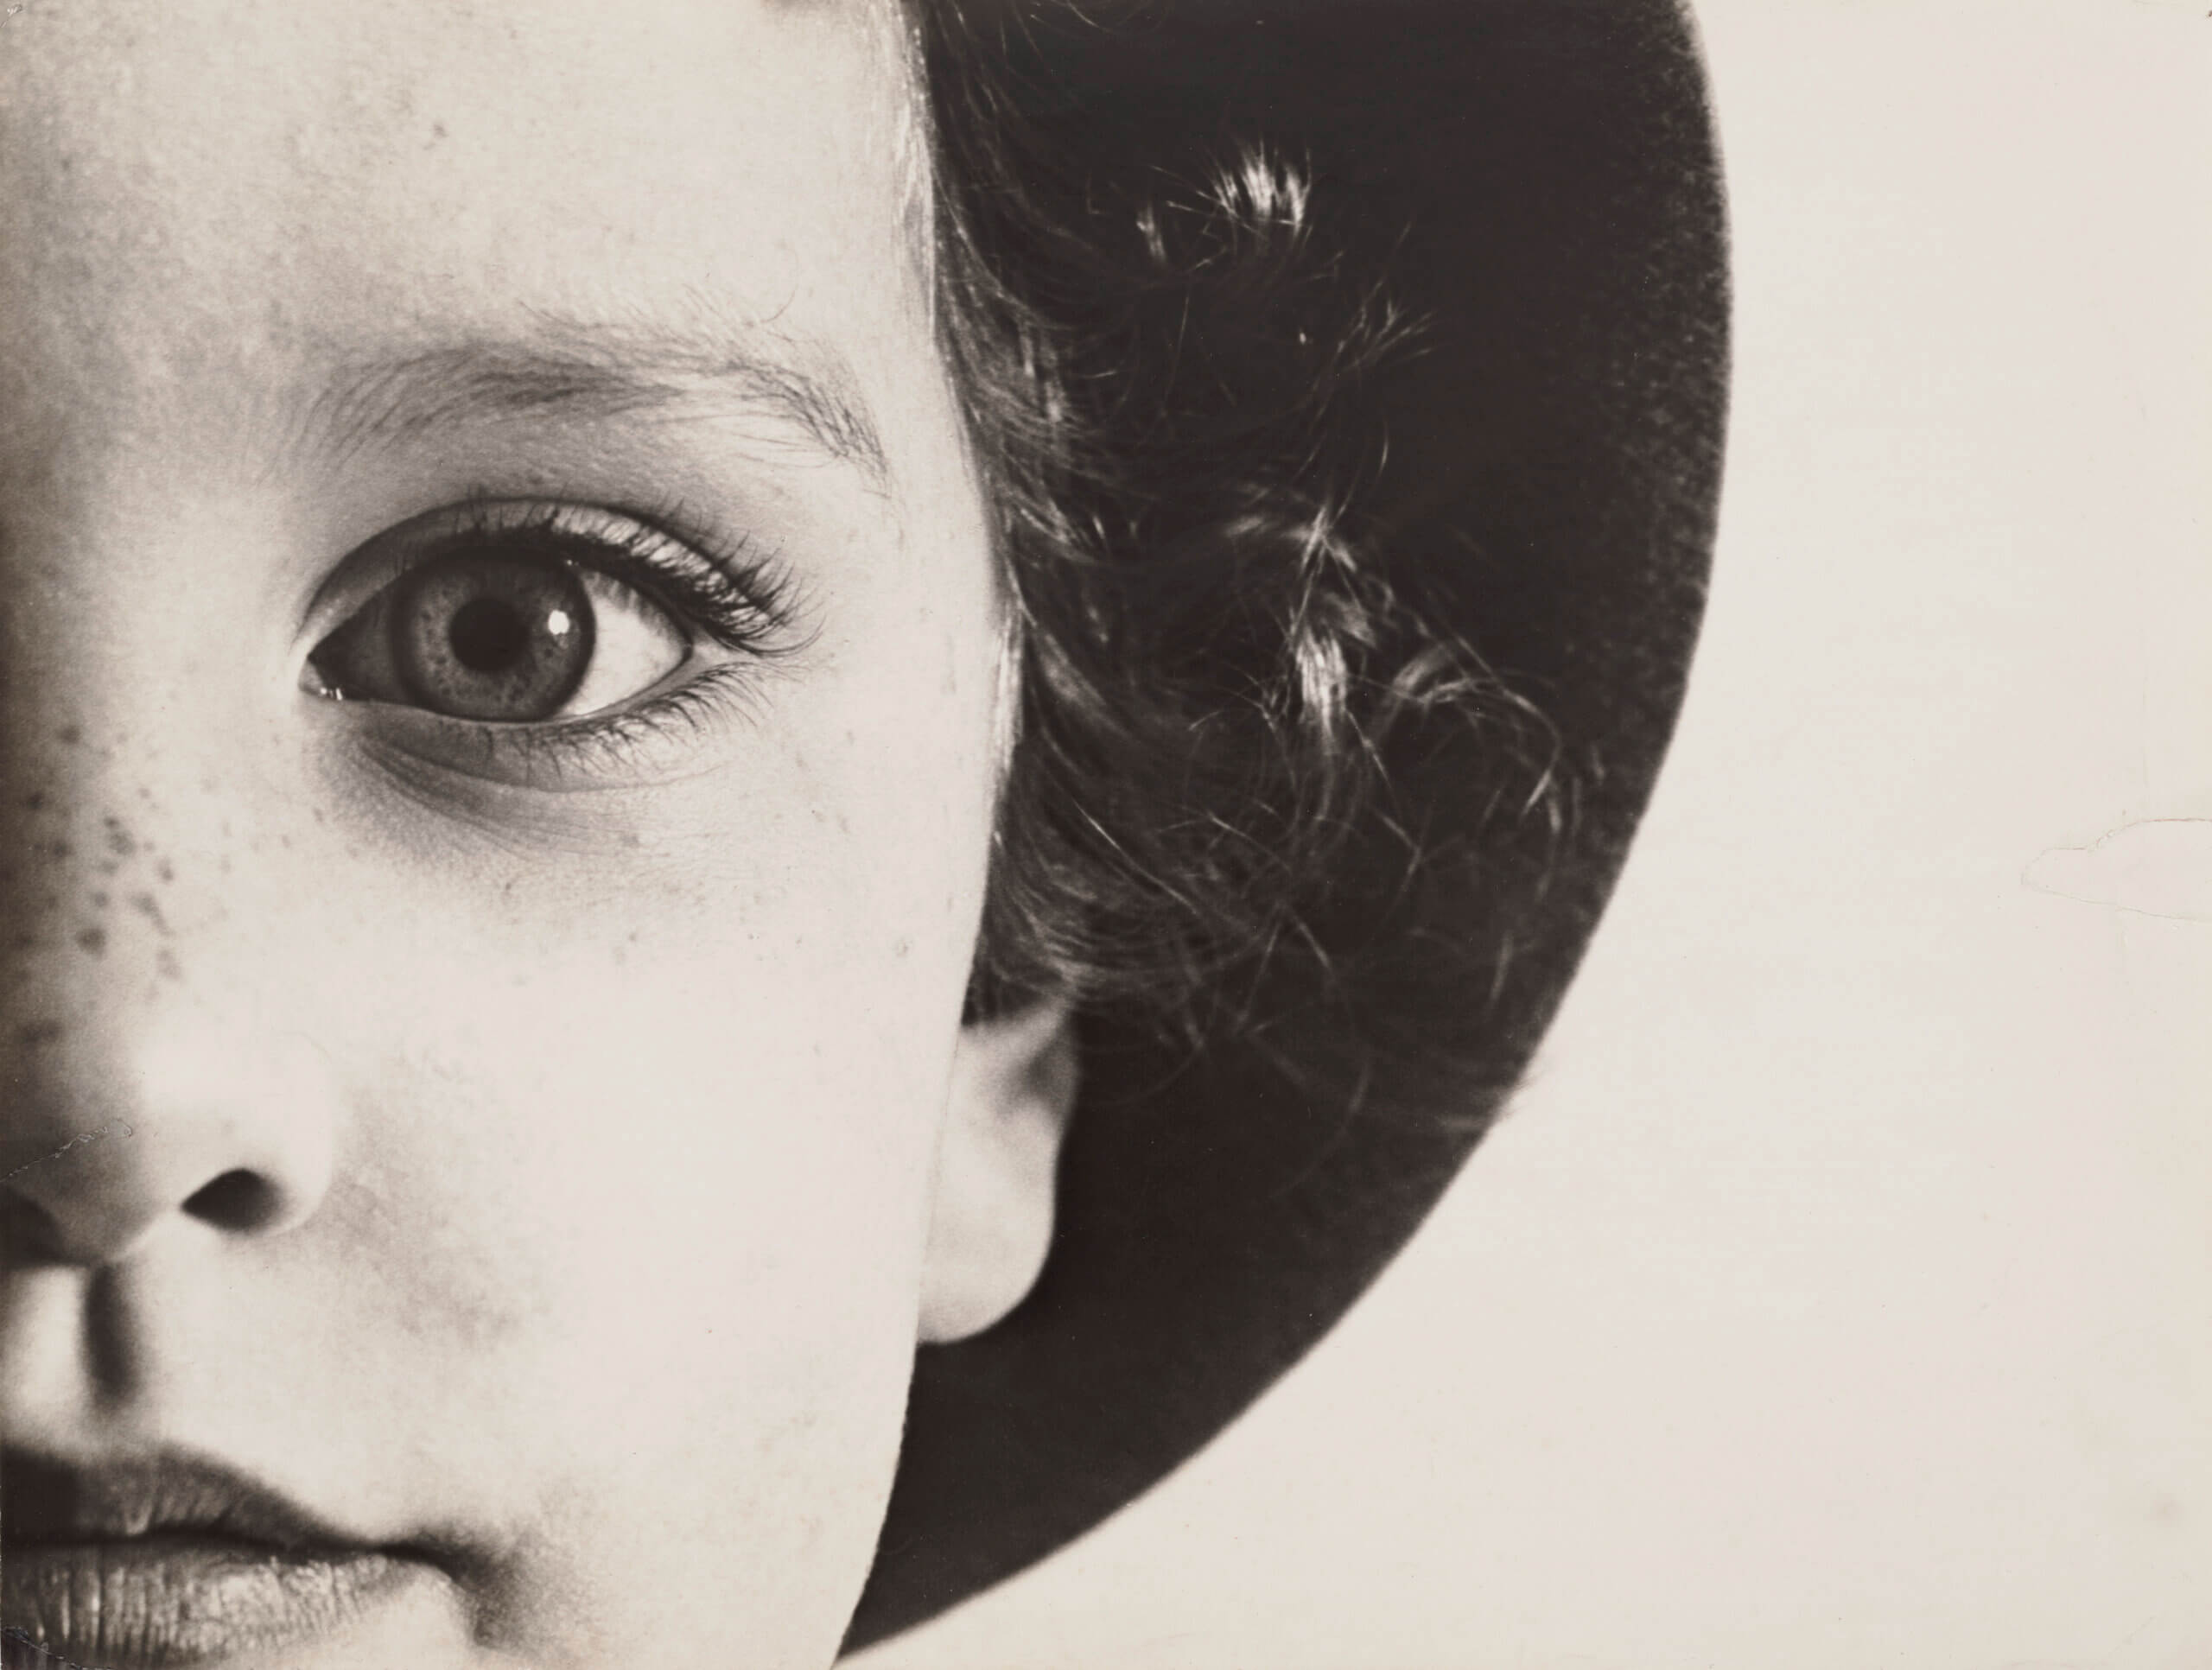 Max Burchartz. Lotte (Eye), 1928. The Museum of Modern Art, New York Thomas Walther Collection